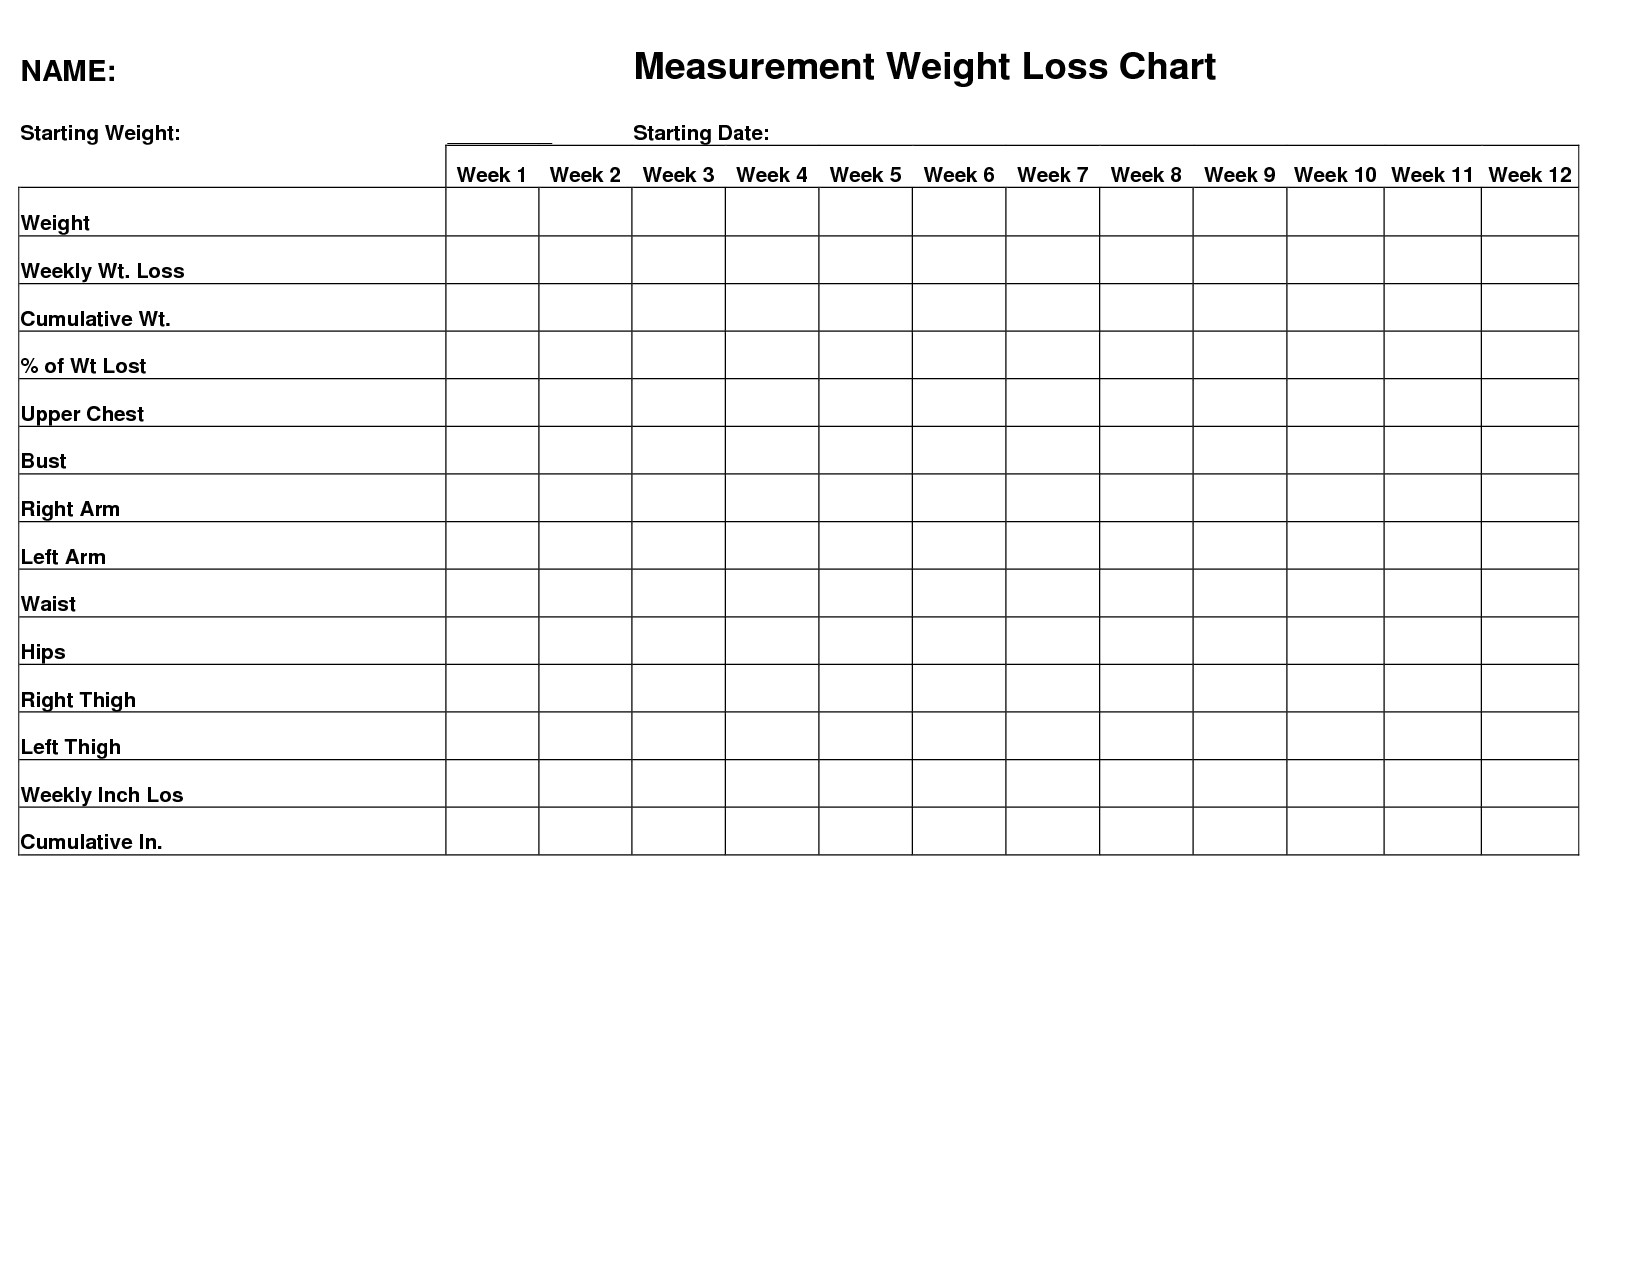 female weight measurement body silhouette outline